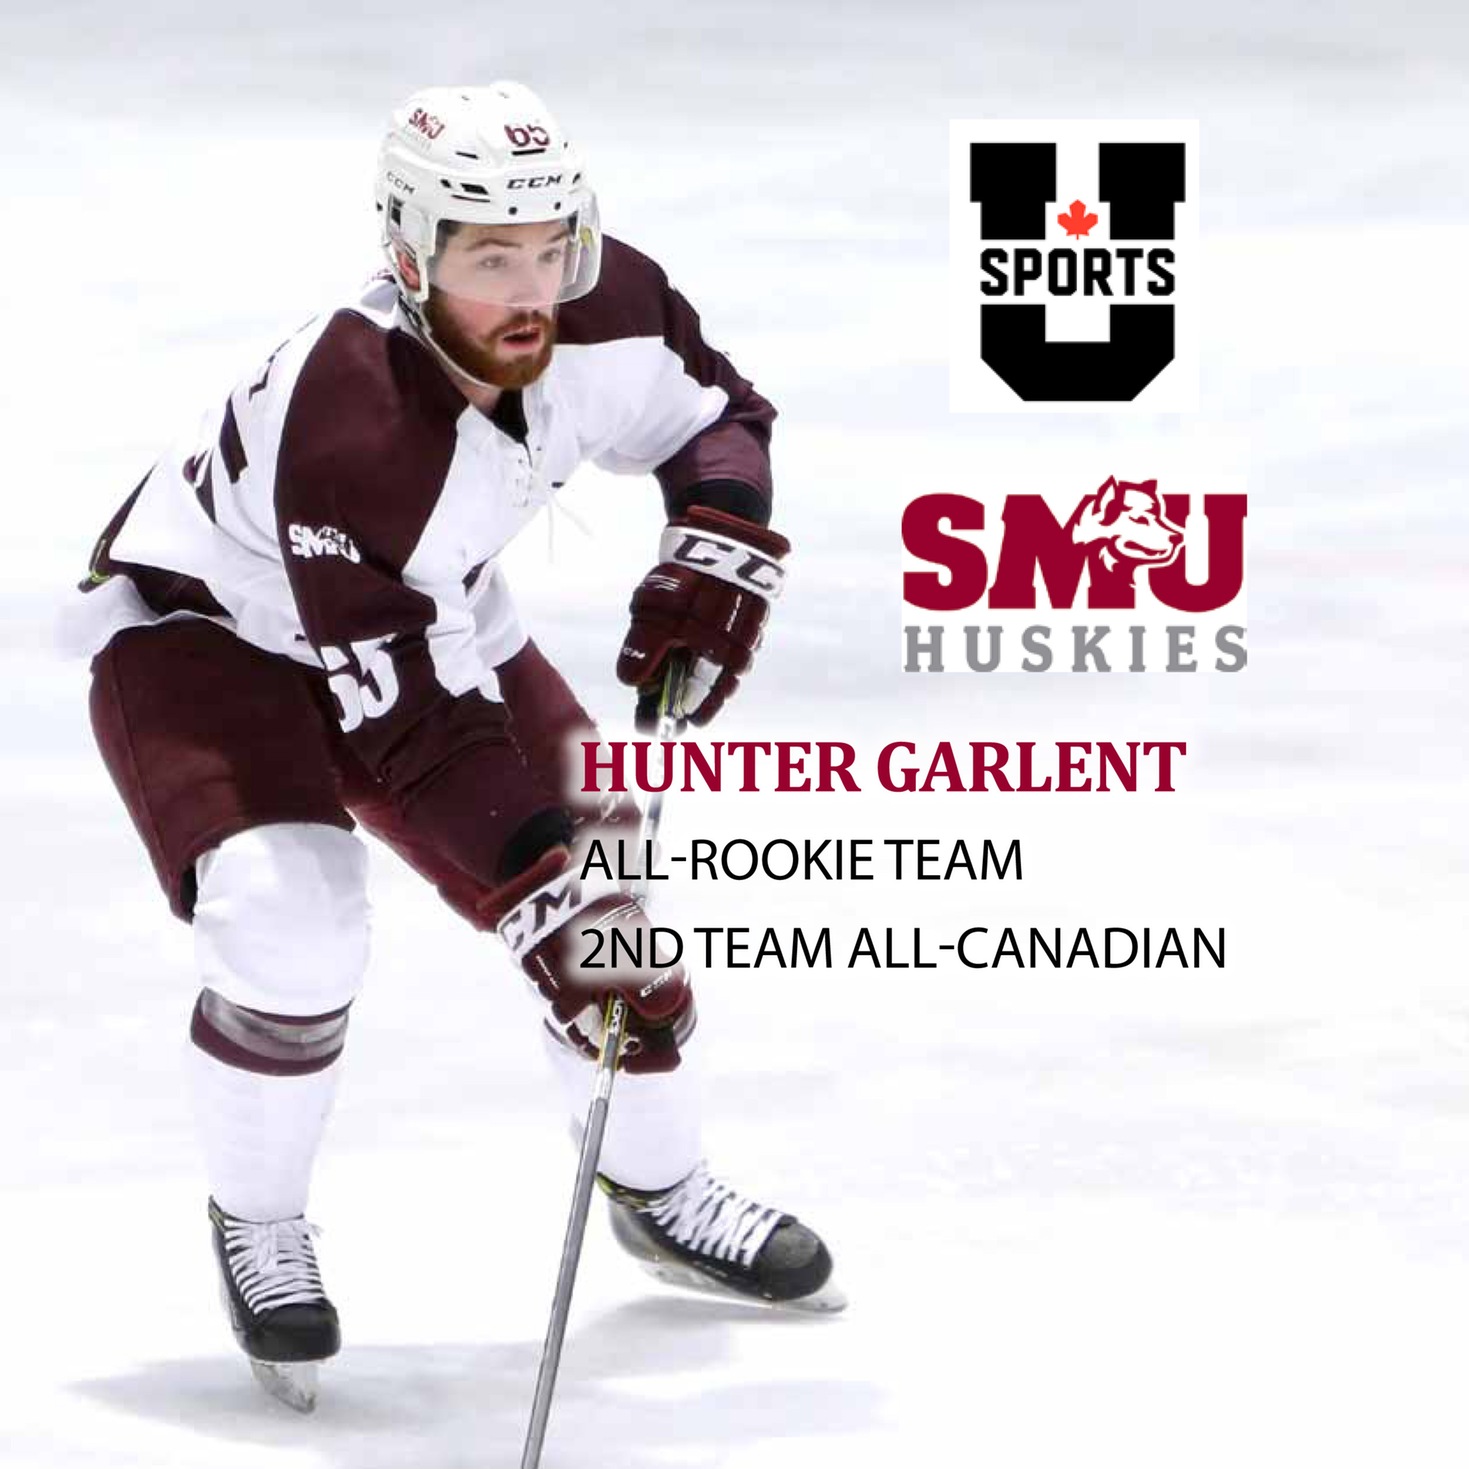 U SPORTS MEN'S HOCKEY AWARDS - Garlent named to All-Rookie team and 2nd team all-canadian